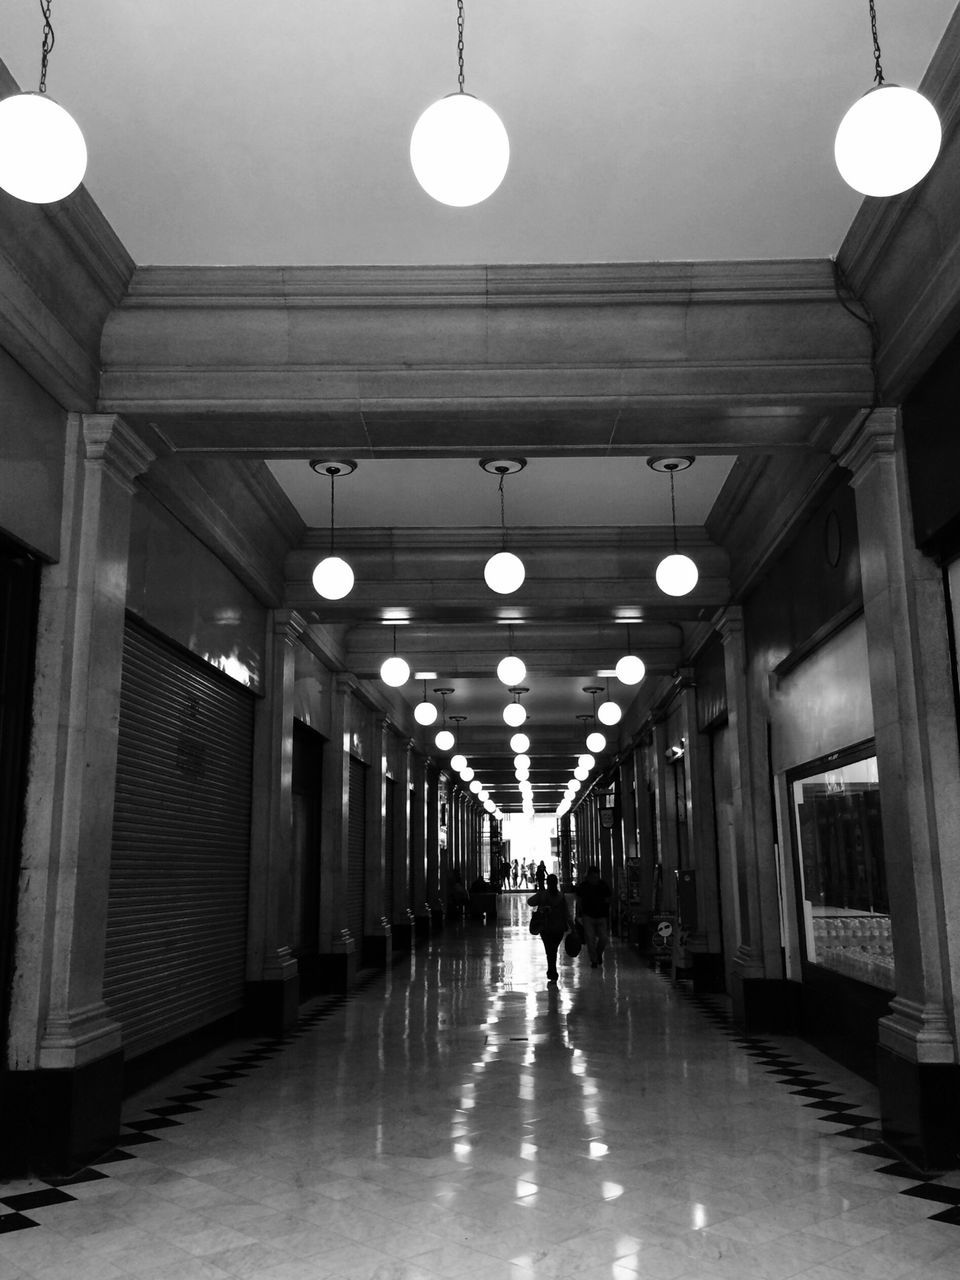 illuminated, lighting equipment, ceiling, indoors, architecture, built structure, the way forward, corridor, diminishing perspective, in a row, electric light, electric lamp, hanging, lamp, empty, night, street light, incidental people, vanishing point, lit